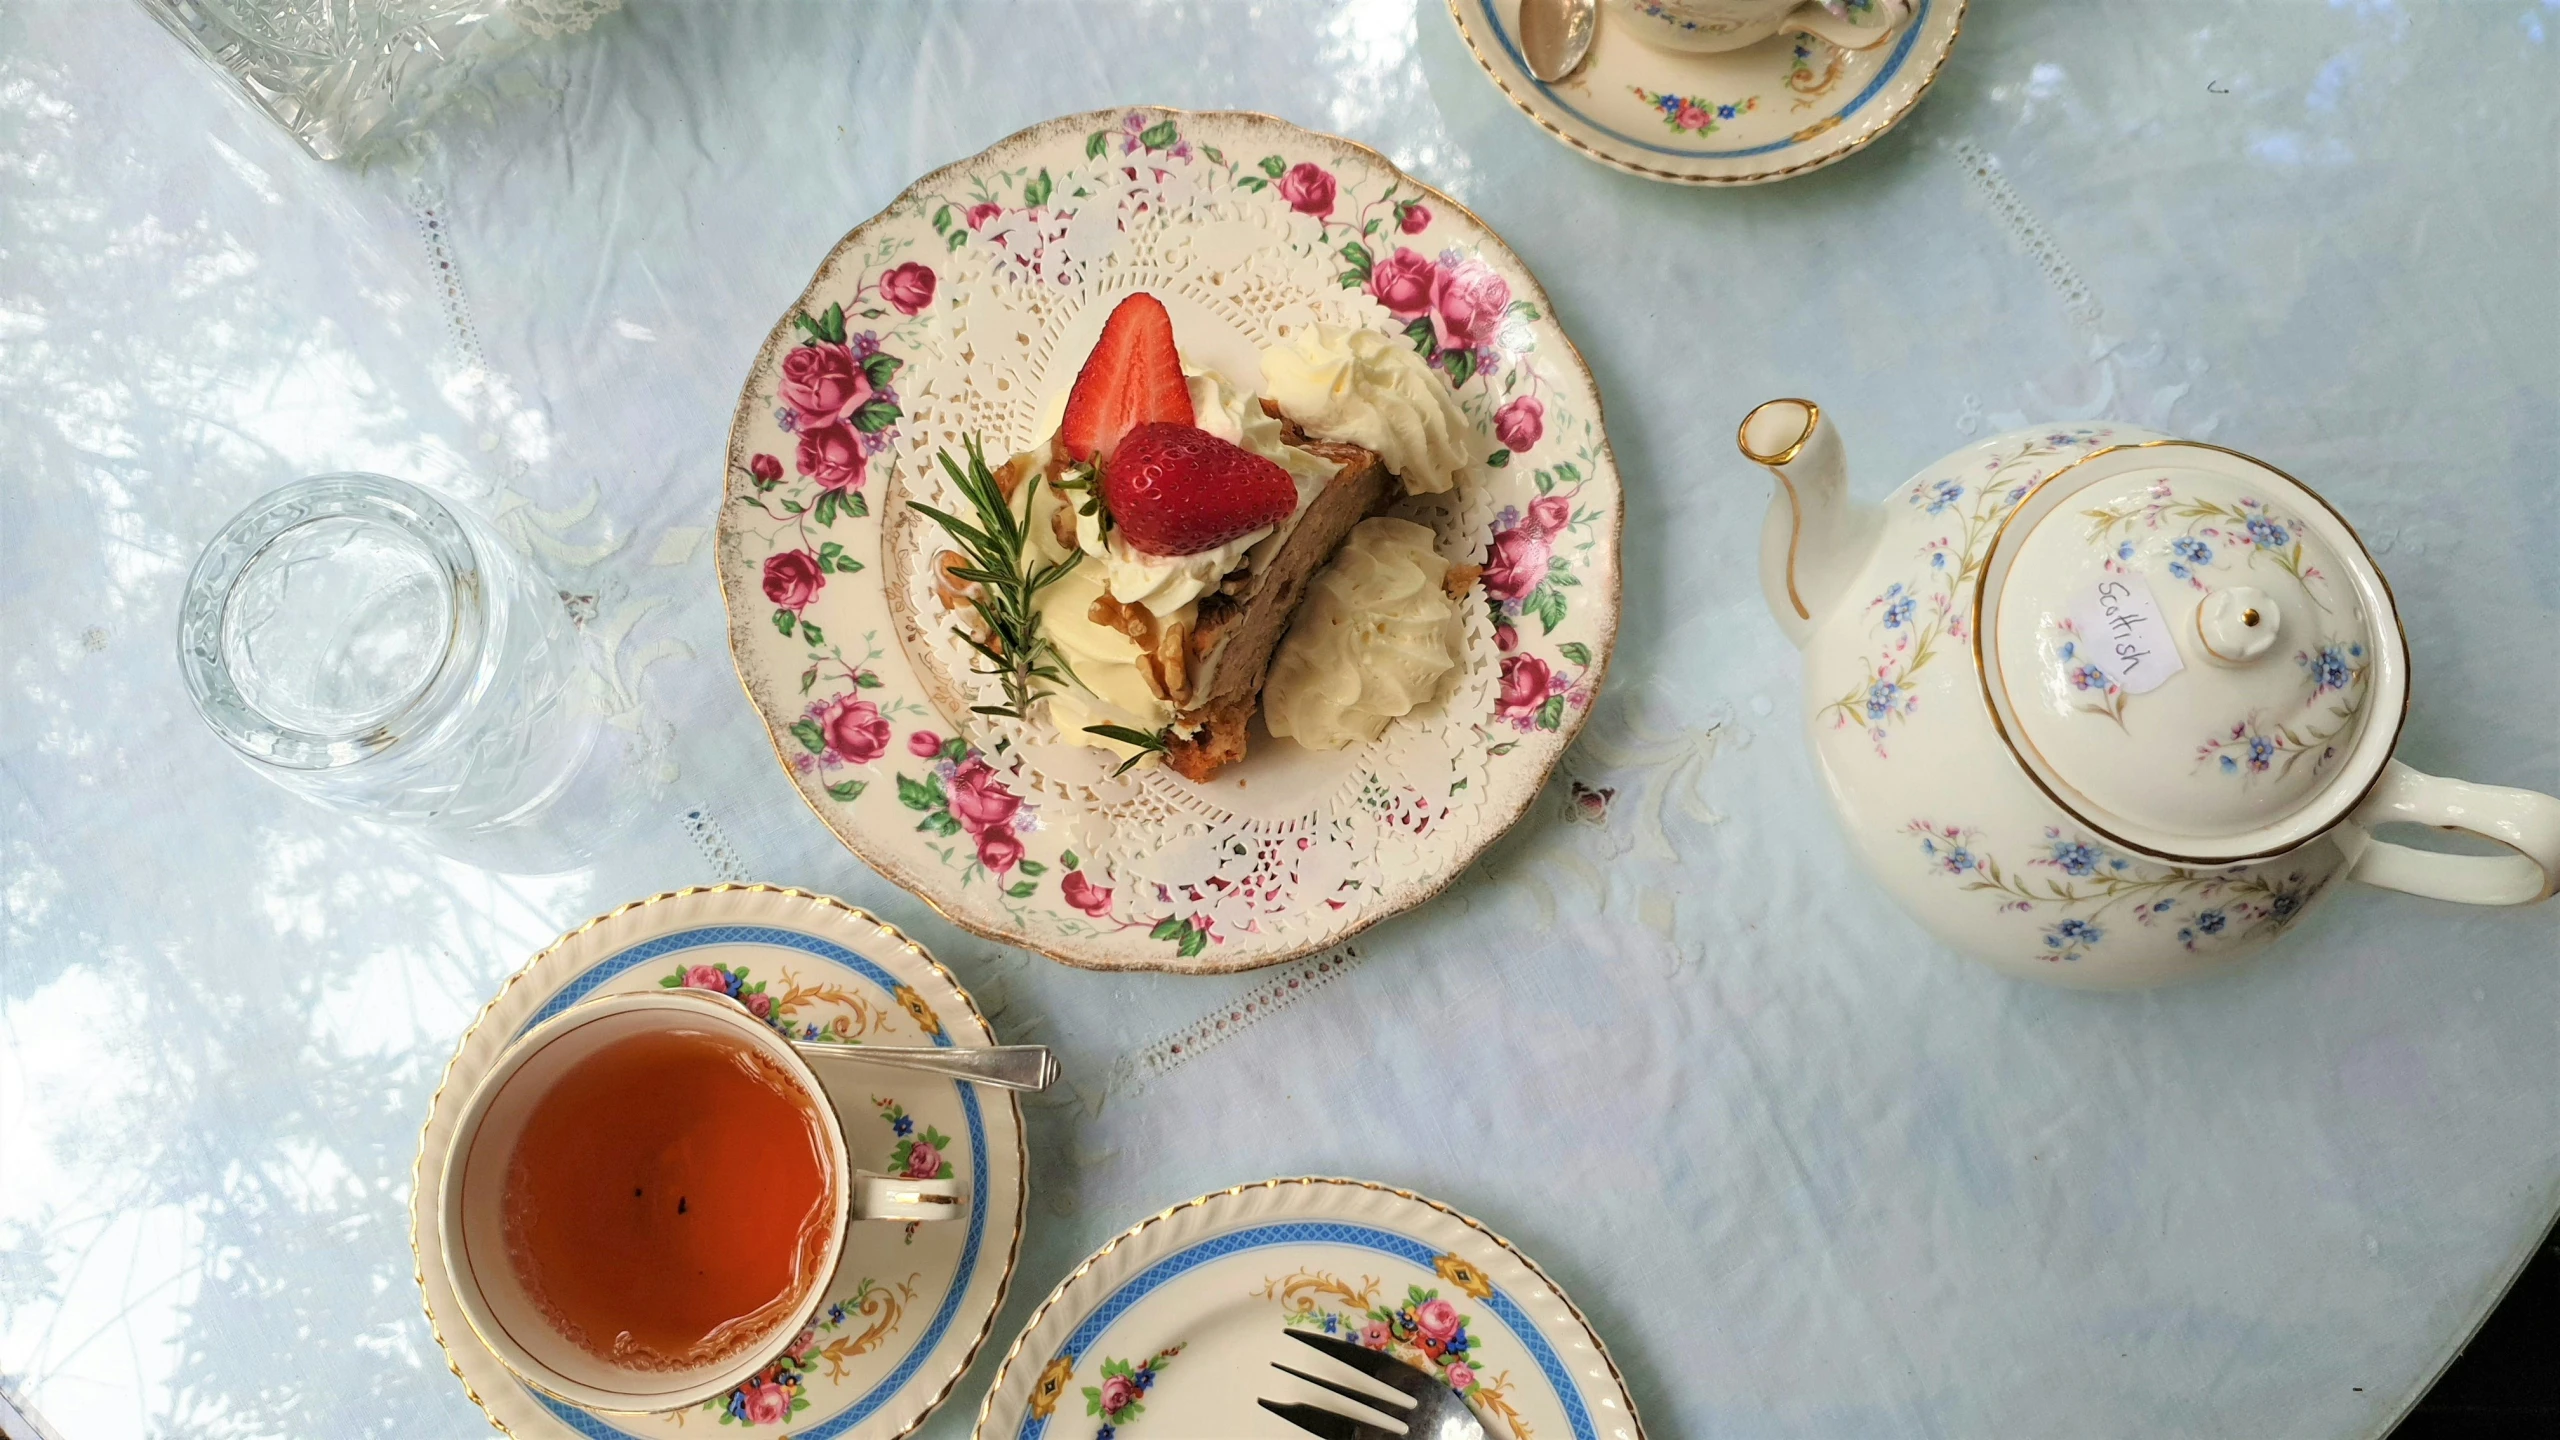 tea set with strawberries and cake on plate